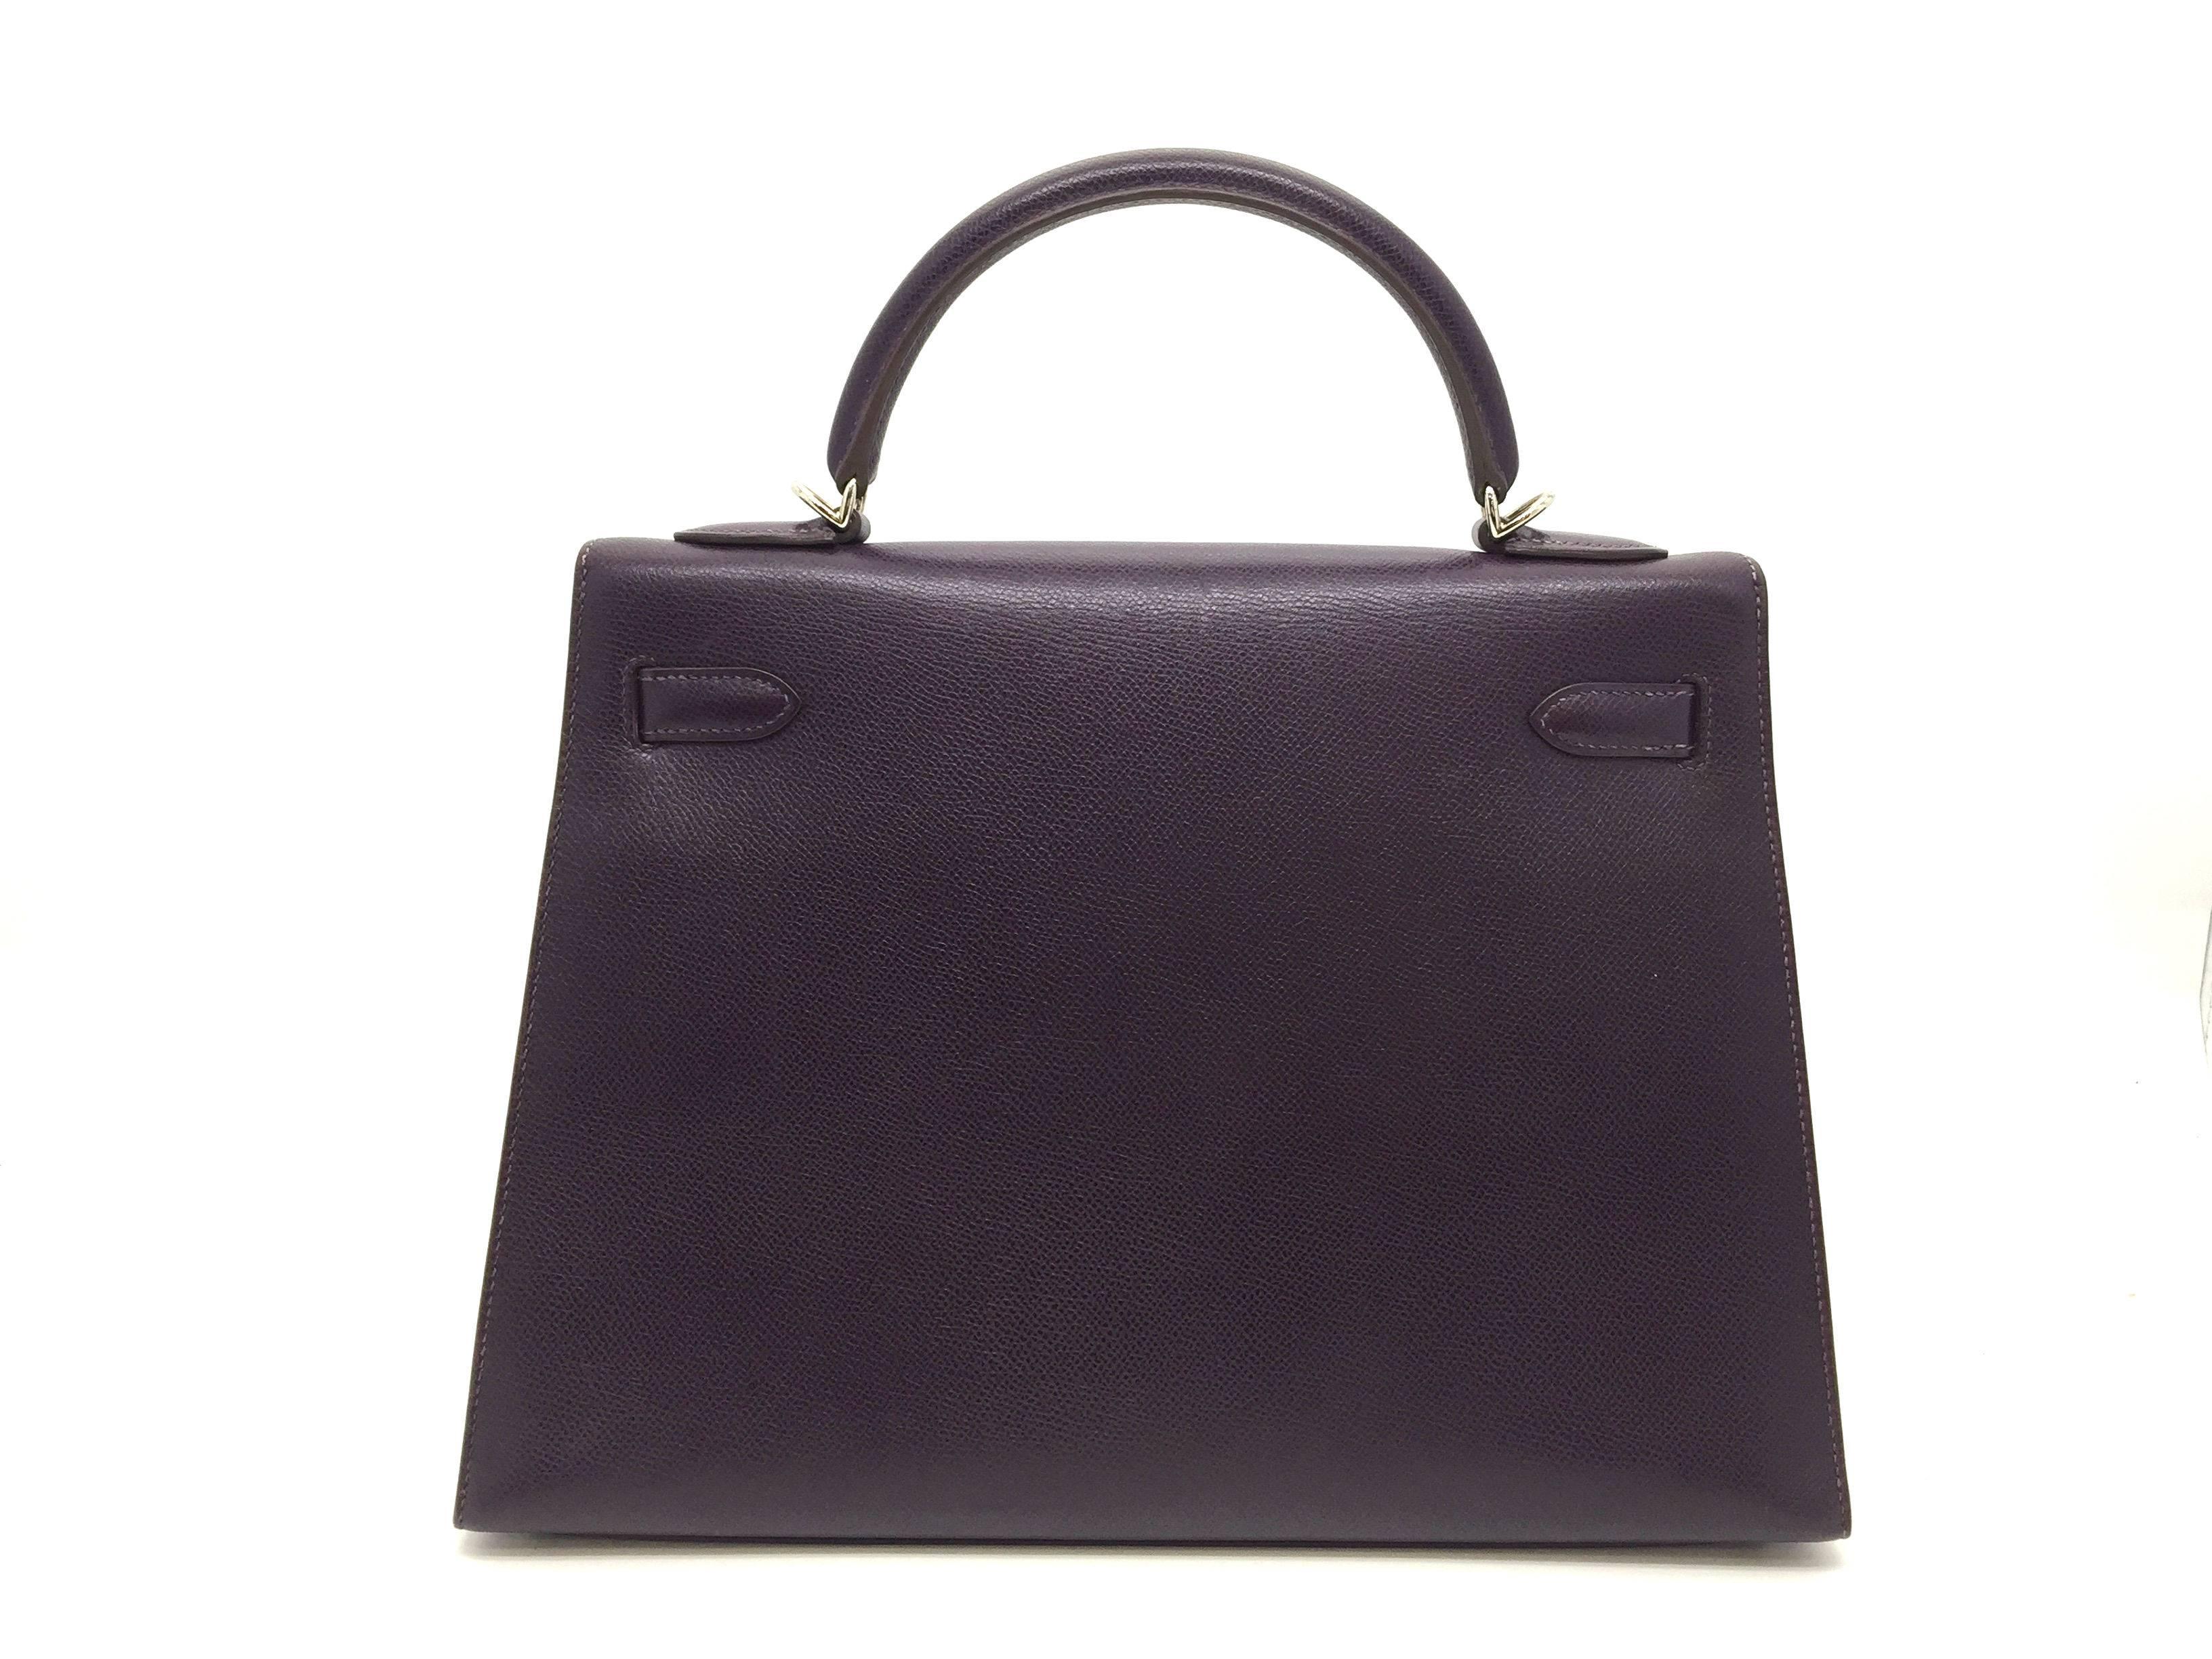 Hermes Kelly 32 Raisin Courchevel Leather SHW Top Handle Bag In Excellent Condition For Sale In Kowloon, HK